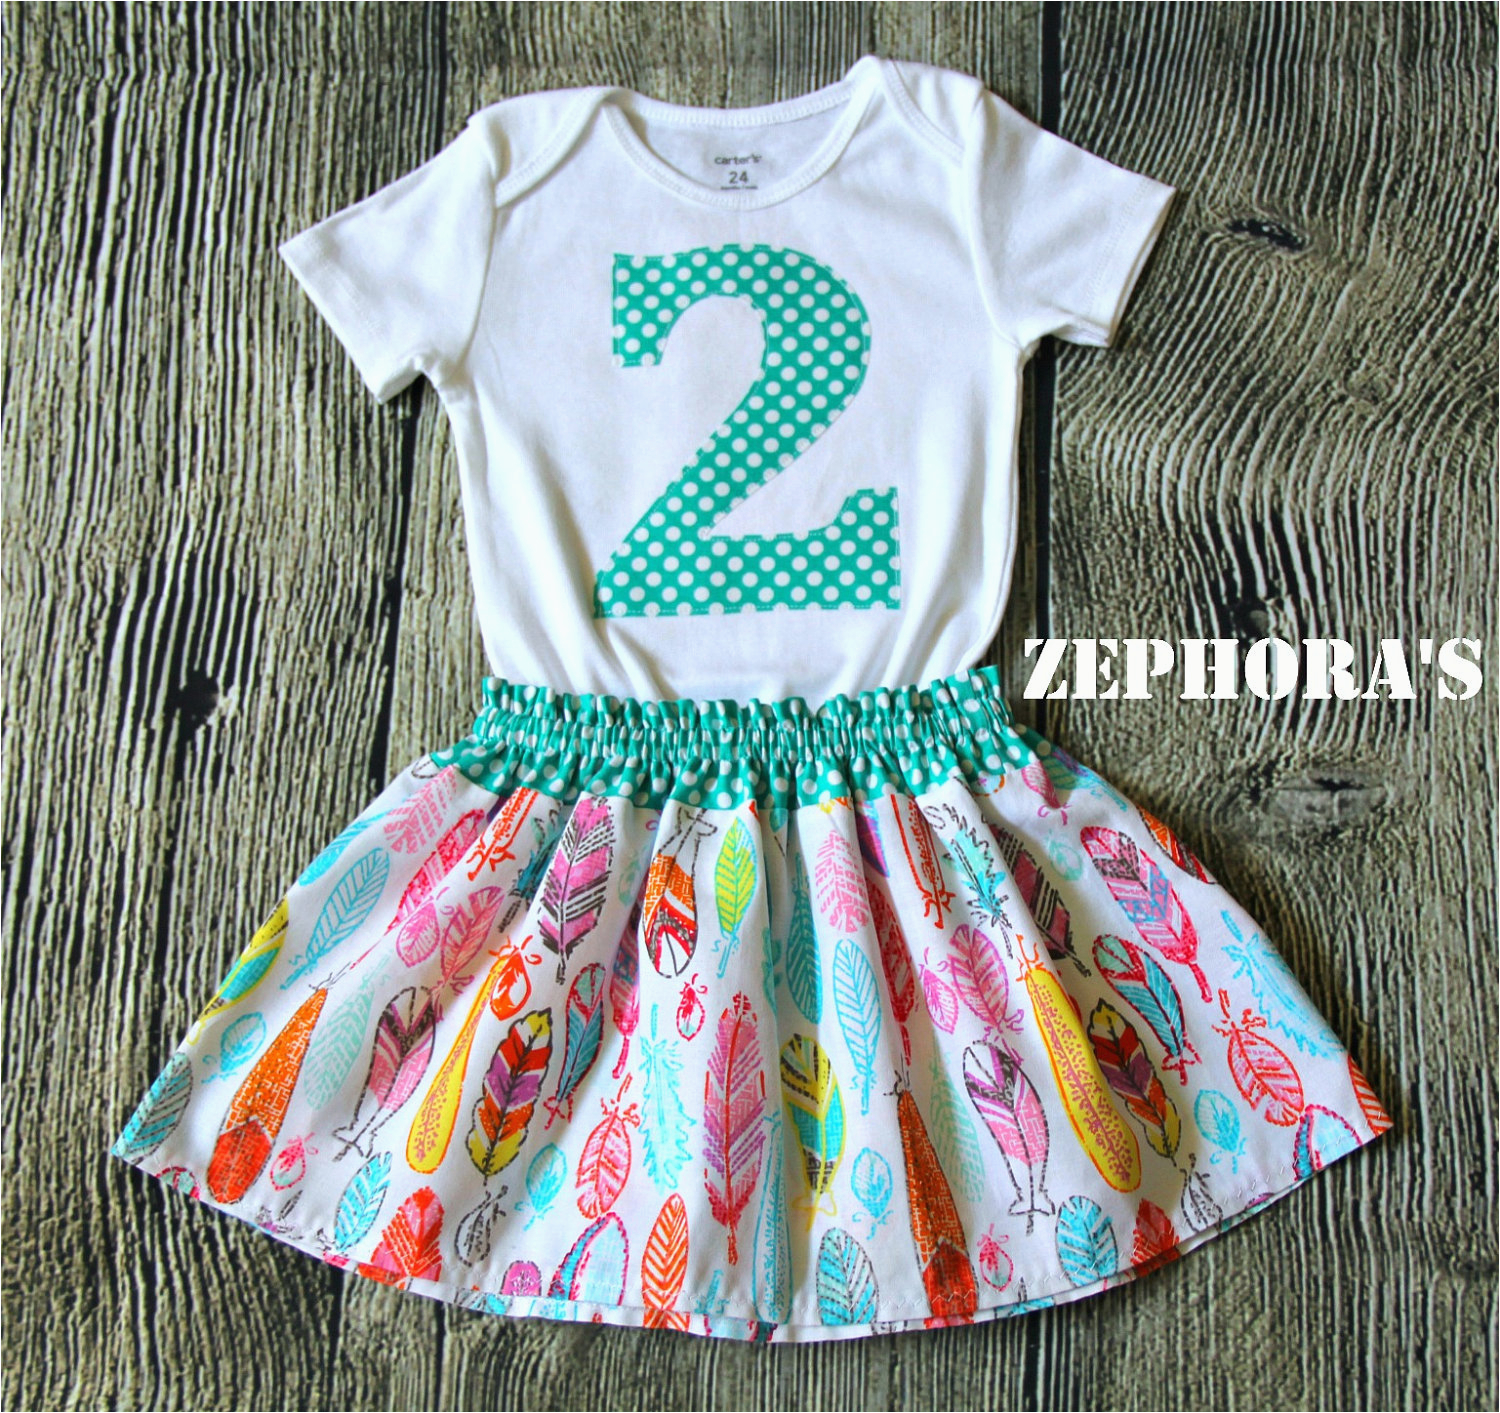 2 year old 2 piece birthday outfit set